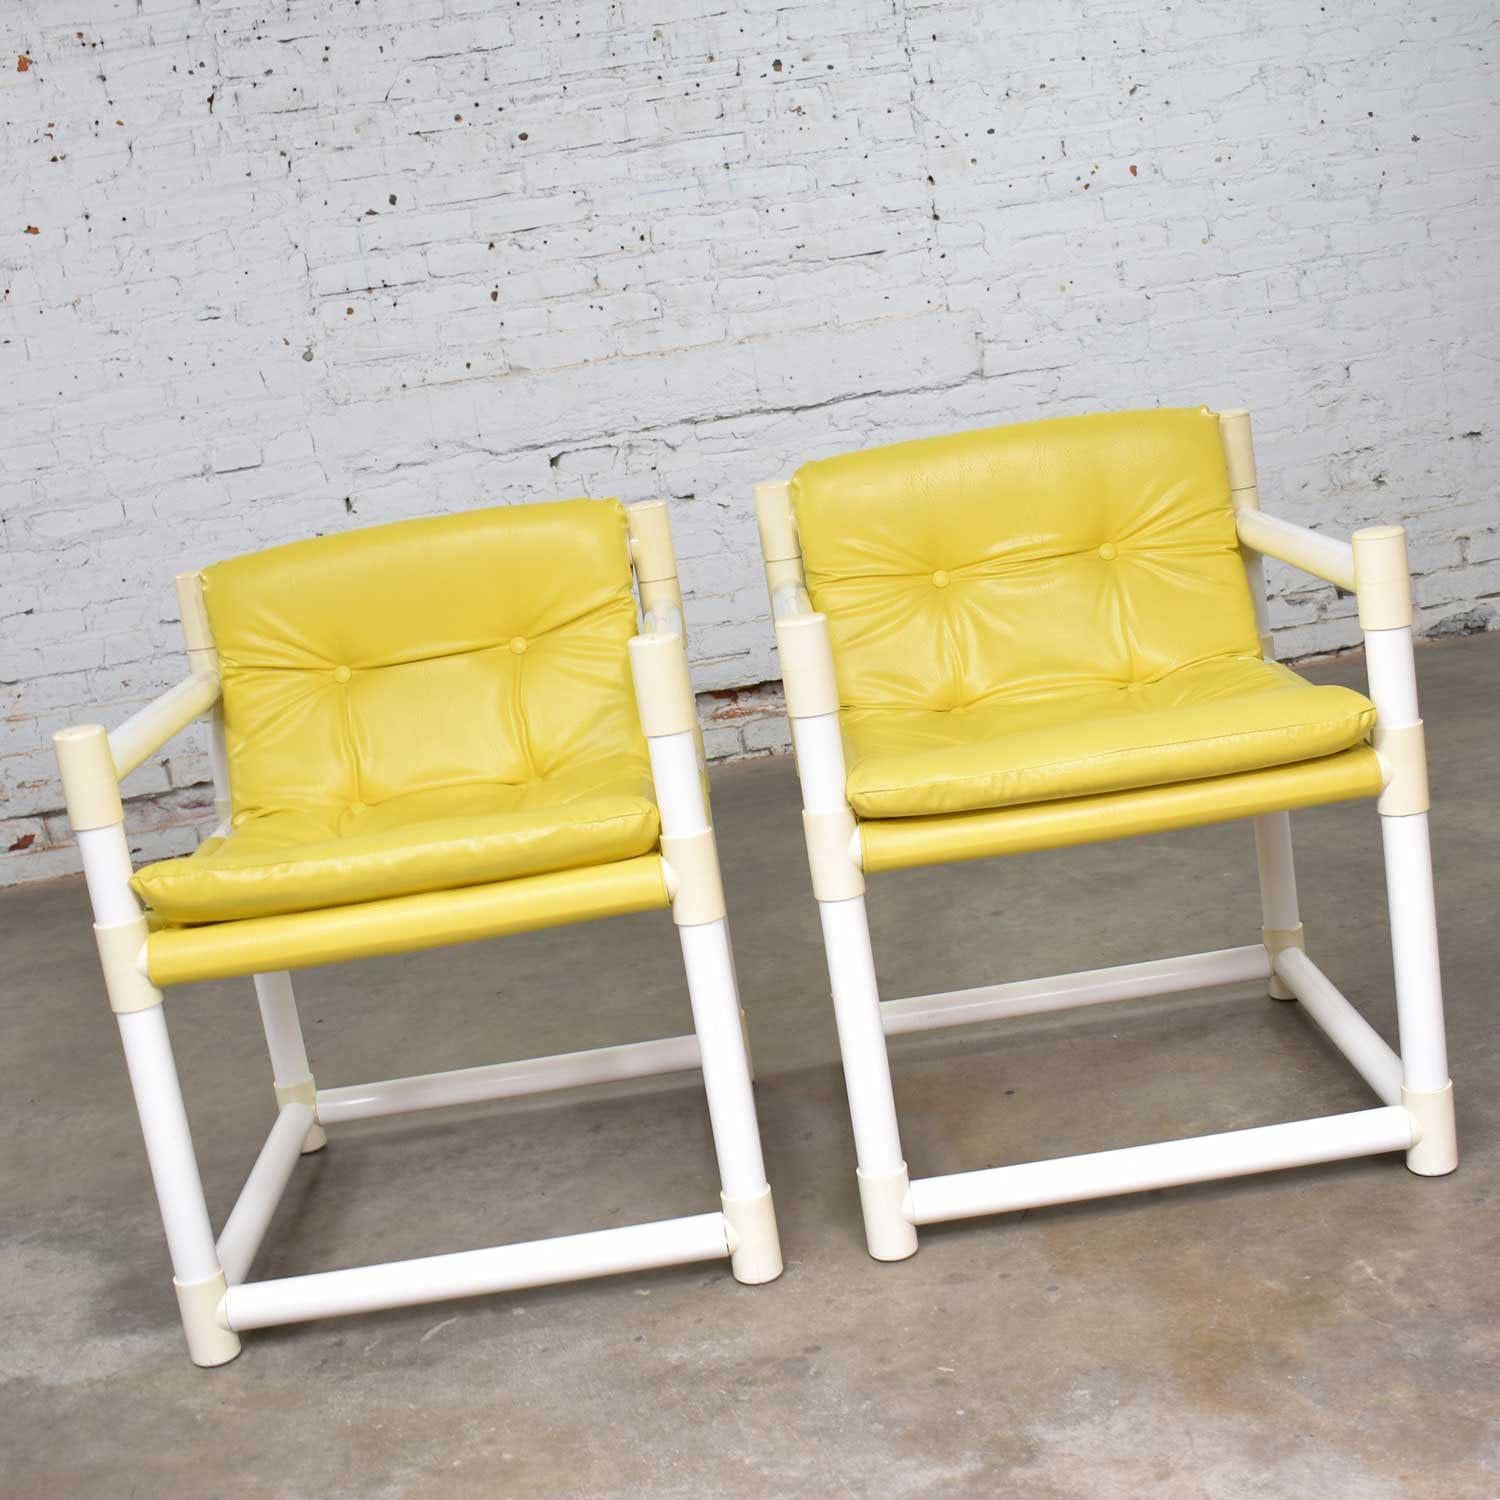 Fun pair of MCM Mid-Century Modern white PVC side chairs with a yellow vinyl upholstery by Decorion Fun Furnishings of Guntown, Mississippi in the style of Jerry Johnson for Landes Manufacturing Co. They are in wonderful vintage condition. There are